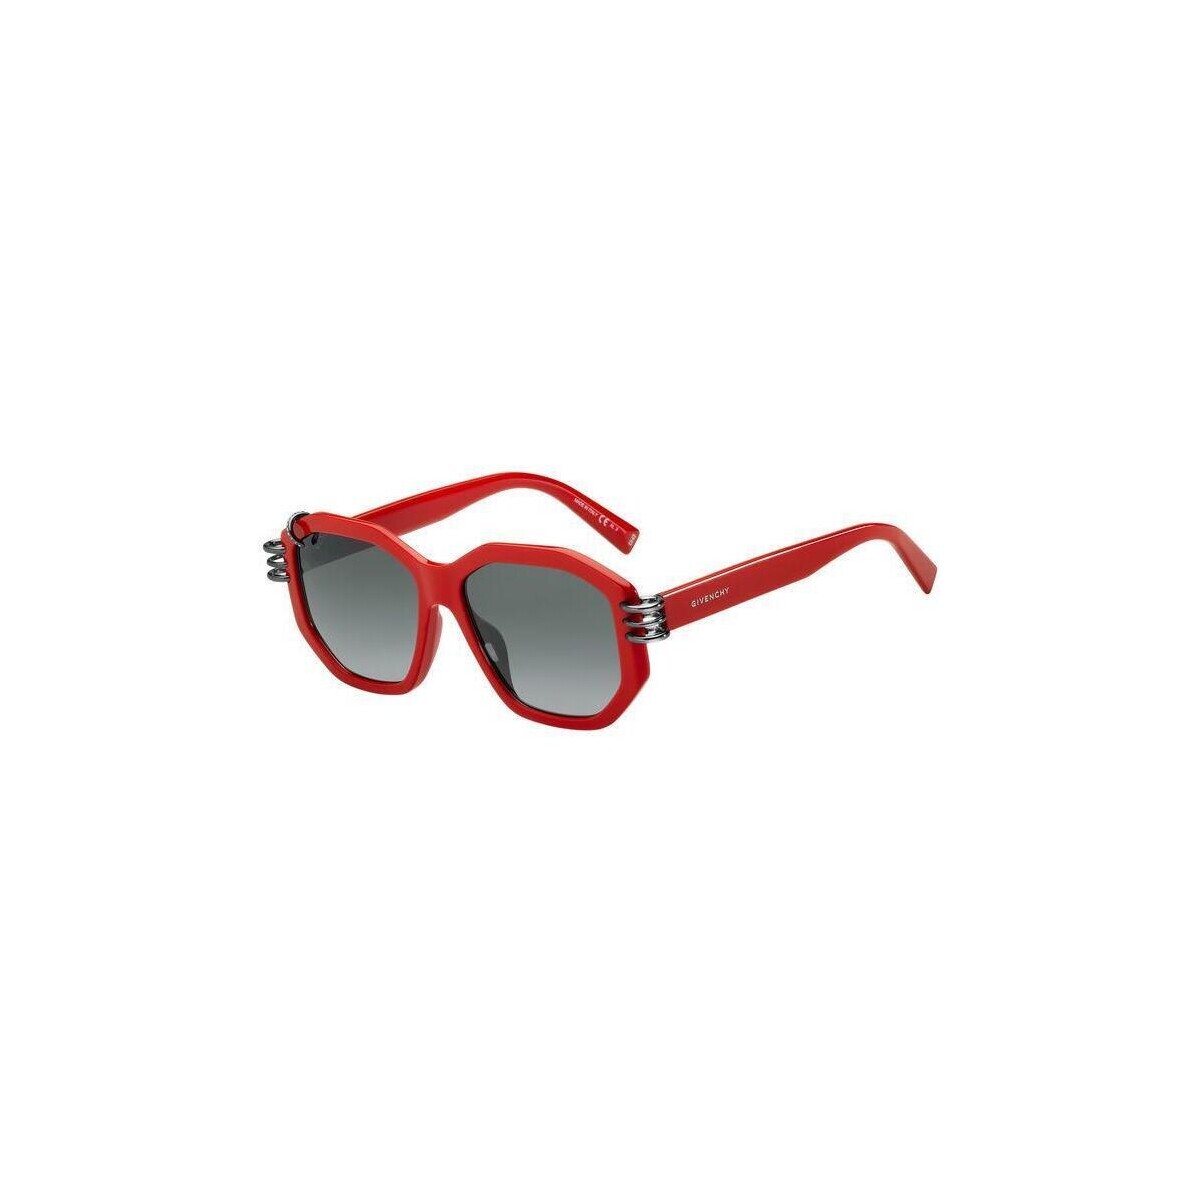 Givenchy Kids 4G embroidered jersey T-shirt Lunettes de soleil Givenchy GV 7175/G/S Lunettes de soleil, Rouge/Gris, 54 mm Rouge